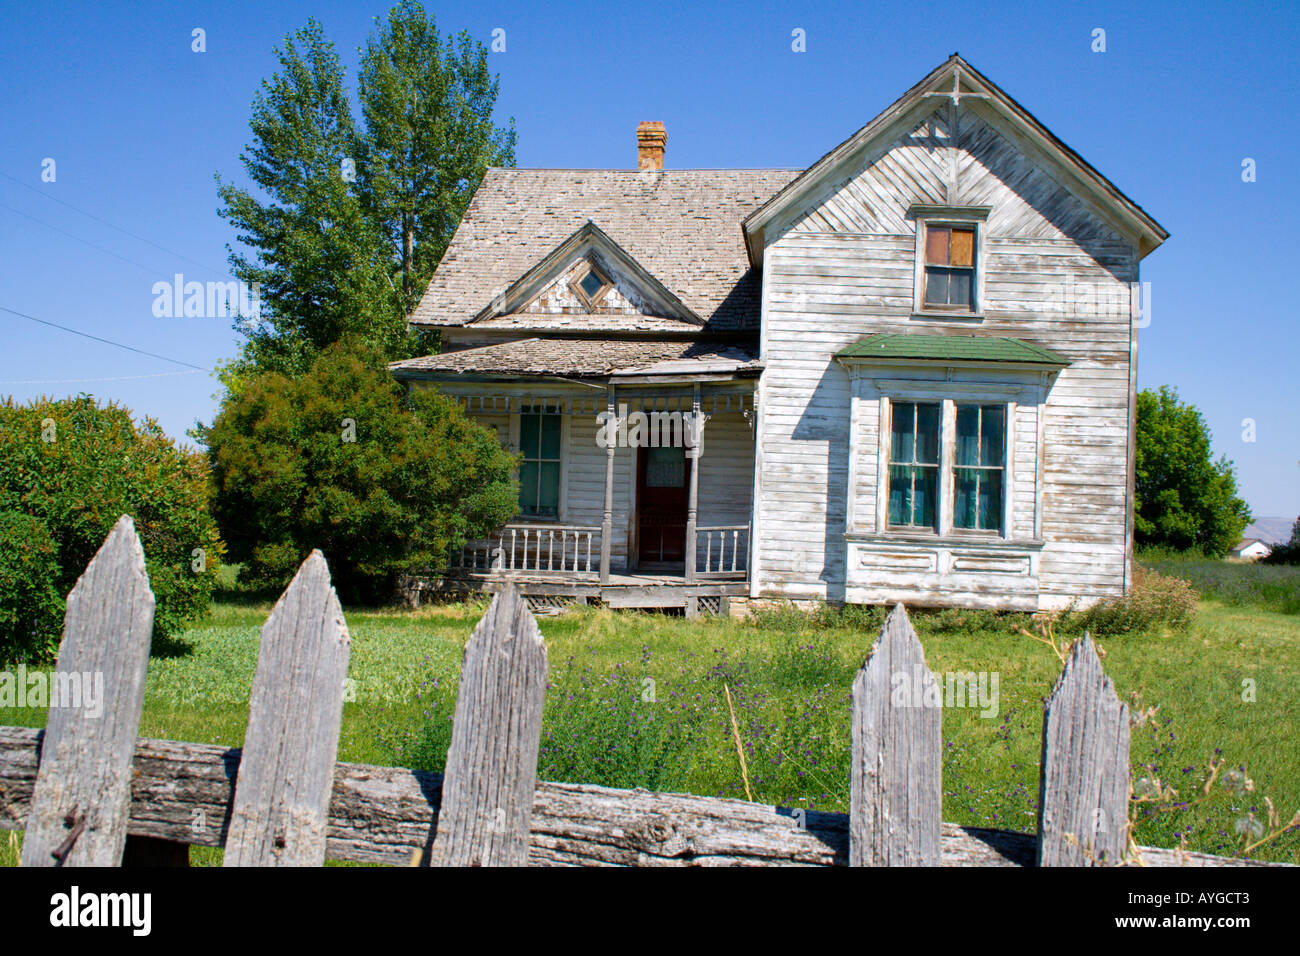 Old Americana wooden house with a large grass lawn Paris Idaho USA Stock Photo